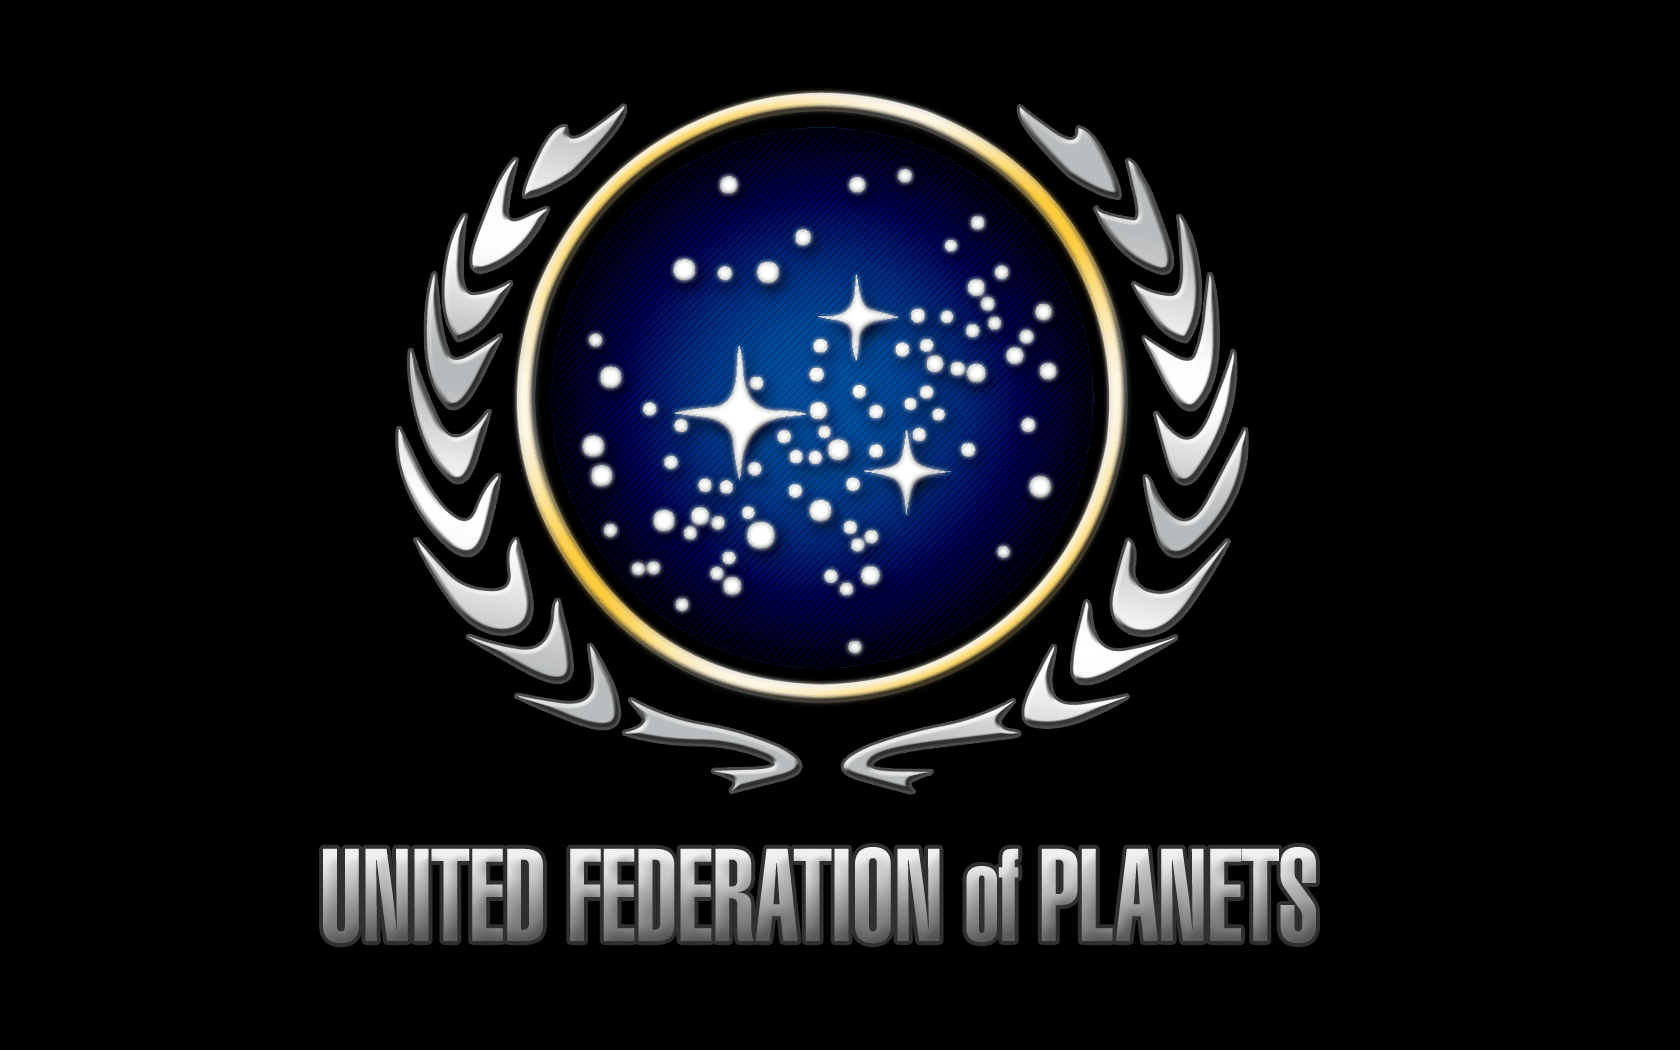 The Federation Logo - Image - UFOP Logo.png | Hypothetical Stars Wiki | FANDOM powered by ...